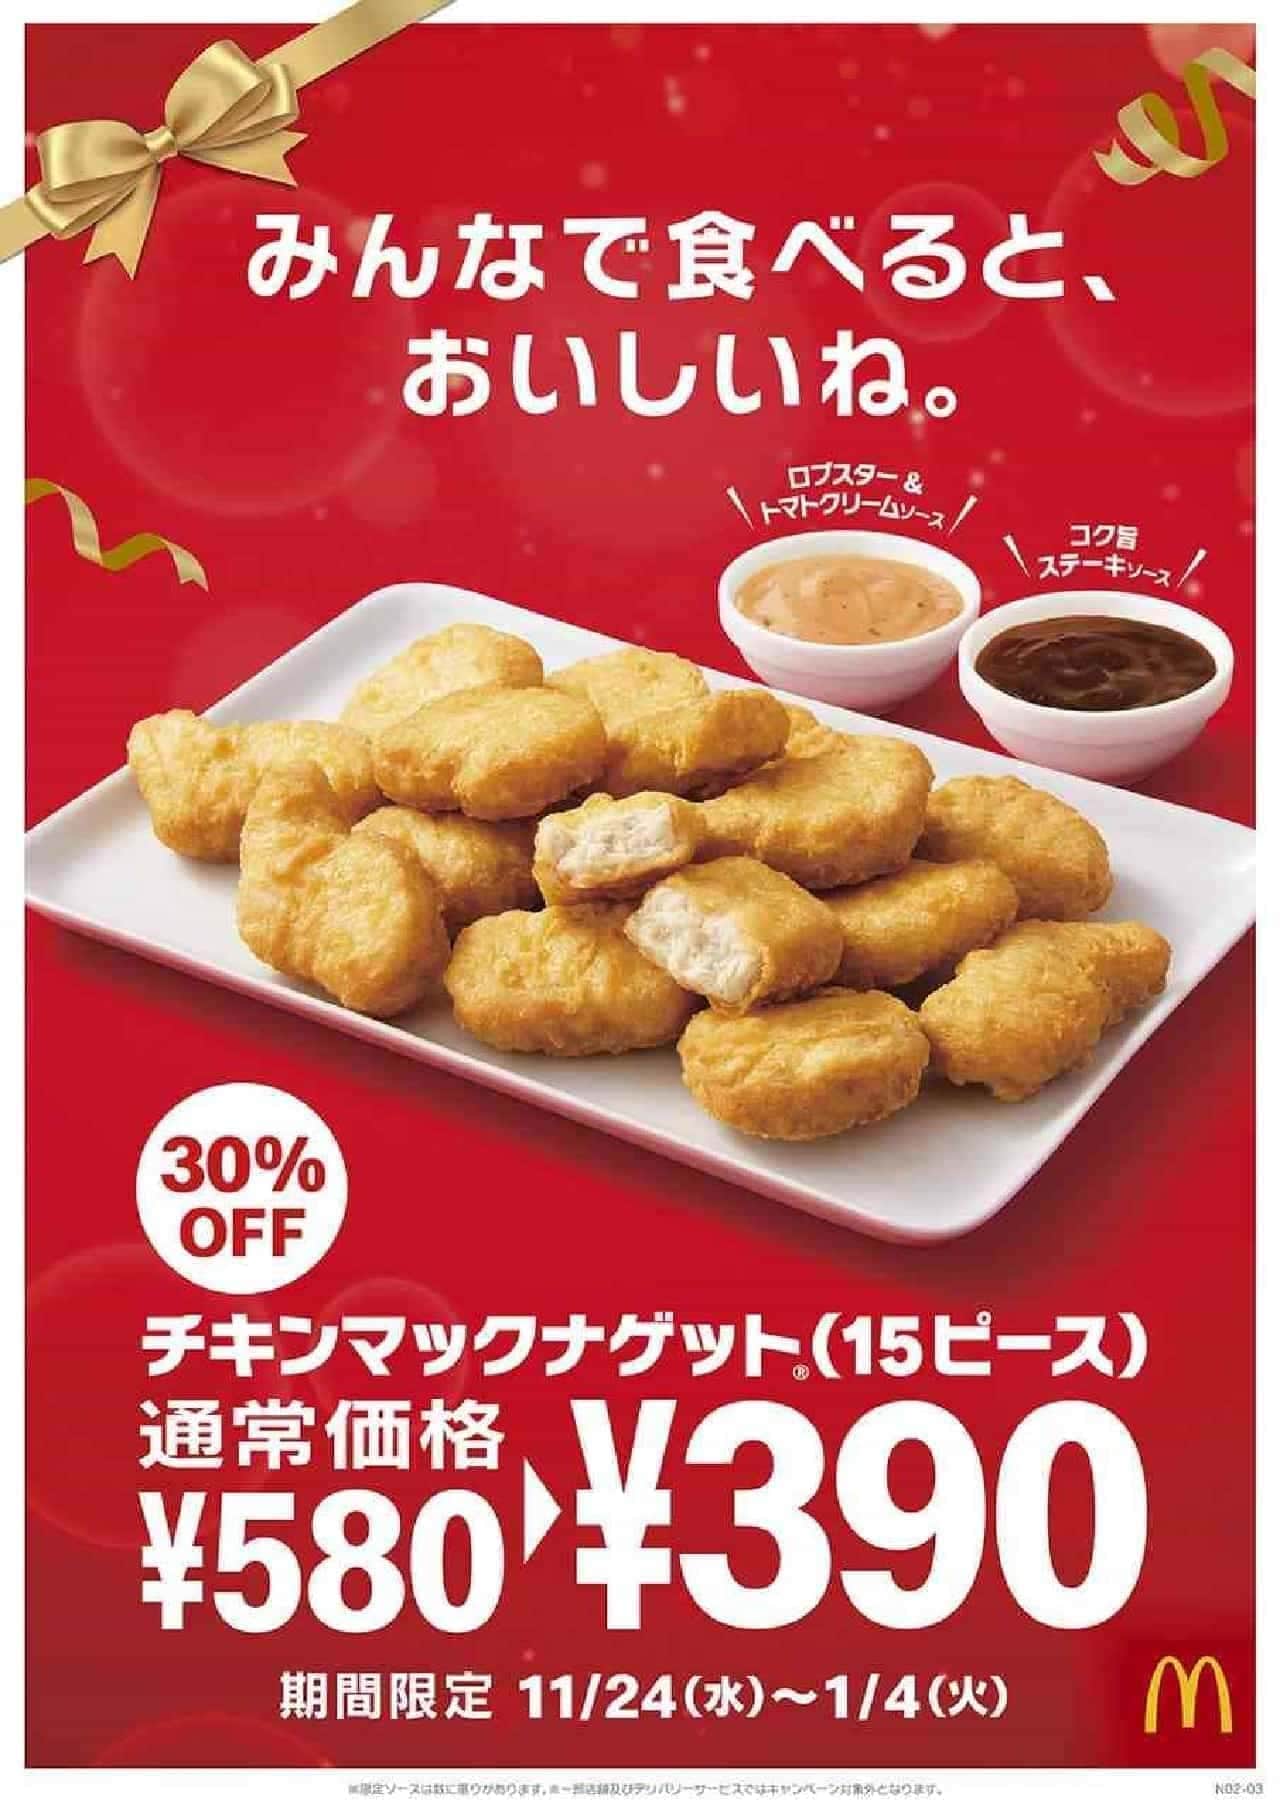 30% off "Chicken Mac Nugget 15 Pieces (with 3 Sauces)"